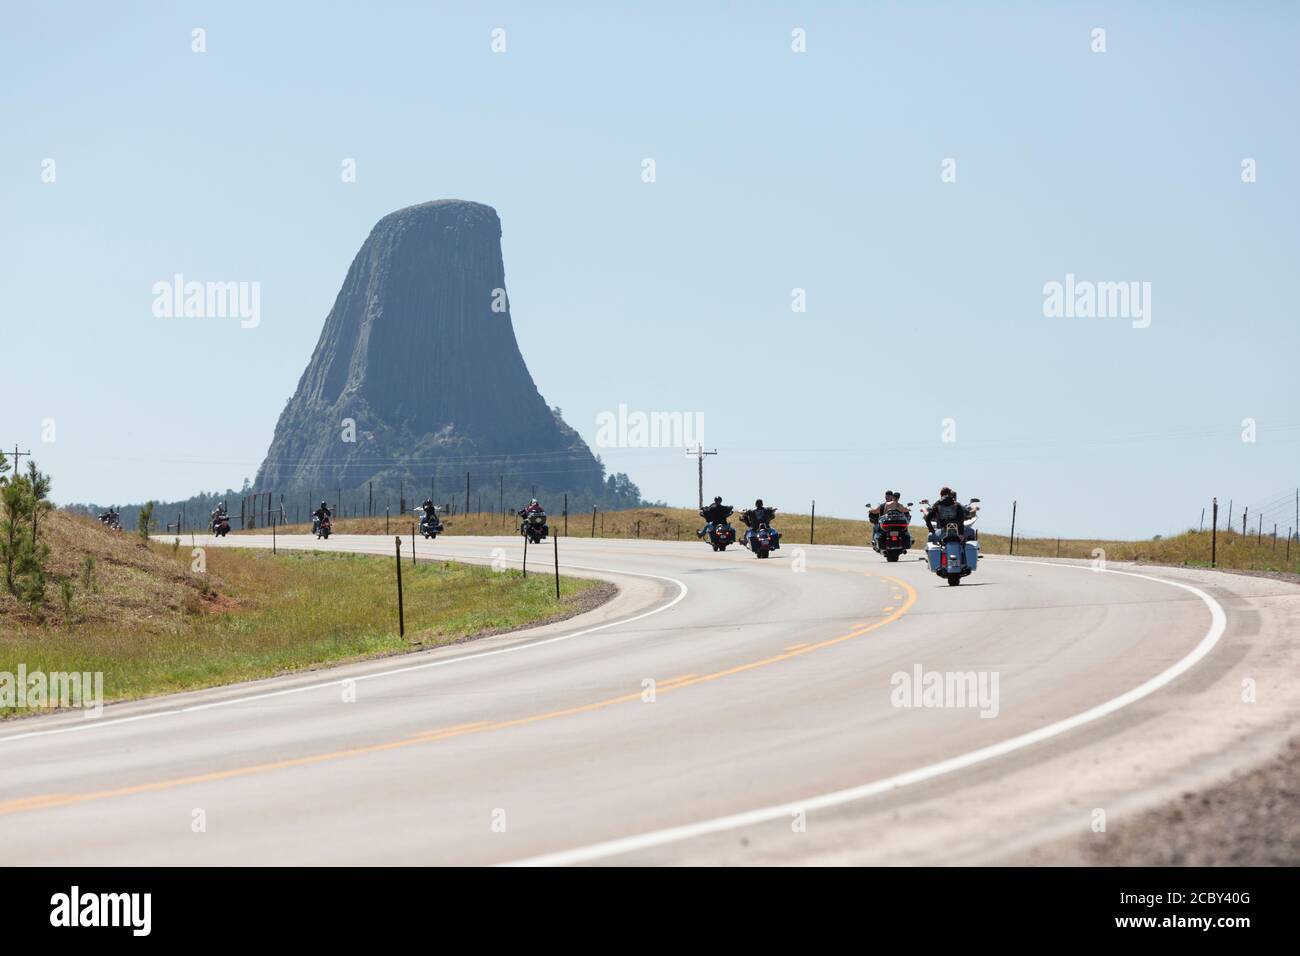 Bikers cruise along Highway 24 near Wyoming’s Devils Tower on Friday, August 14, 2020. Every year, bikers who attend the nearby Sturgis Motorcycle Rally in South Dakota descend on the iconic landmark. Stock Photo